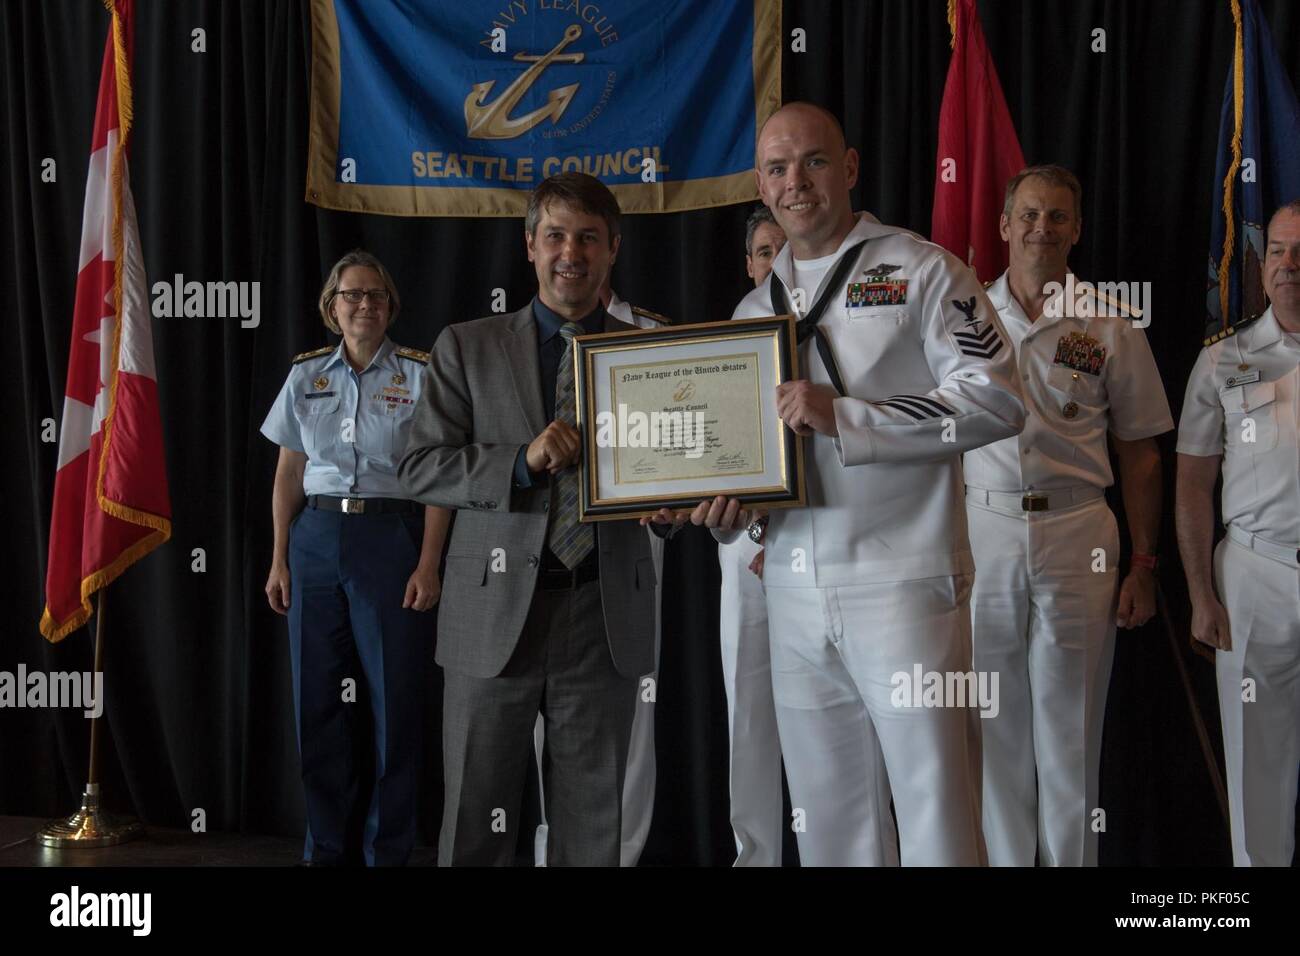 SEATTLE (Aug. 3, 2018) Hospital Corpsman 1st Class Thomas Geisinger is awarded Naval Hospital Bremerton Sailor of the Year during a Seattle Navy League Sea Services Luncheon as part of Seattle’s Seafair Fleet Week. Seafair Fleet Week is an annual celebration of the sea services wherein Sailors, Marines and Coast Guard members from visiting U.S. Navy and Coast Guard ships and ships from Canada make the city a port of call. Stock Photo